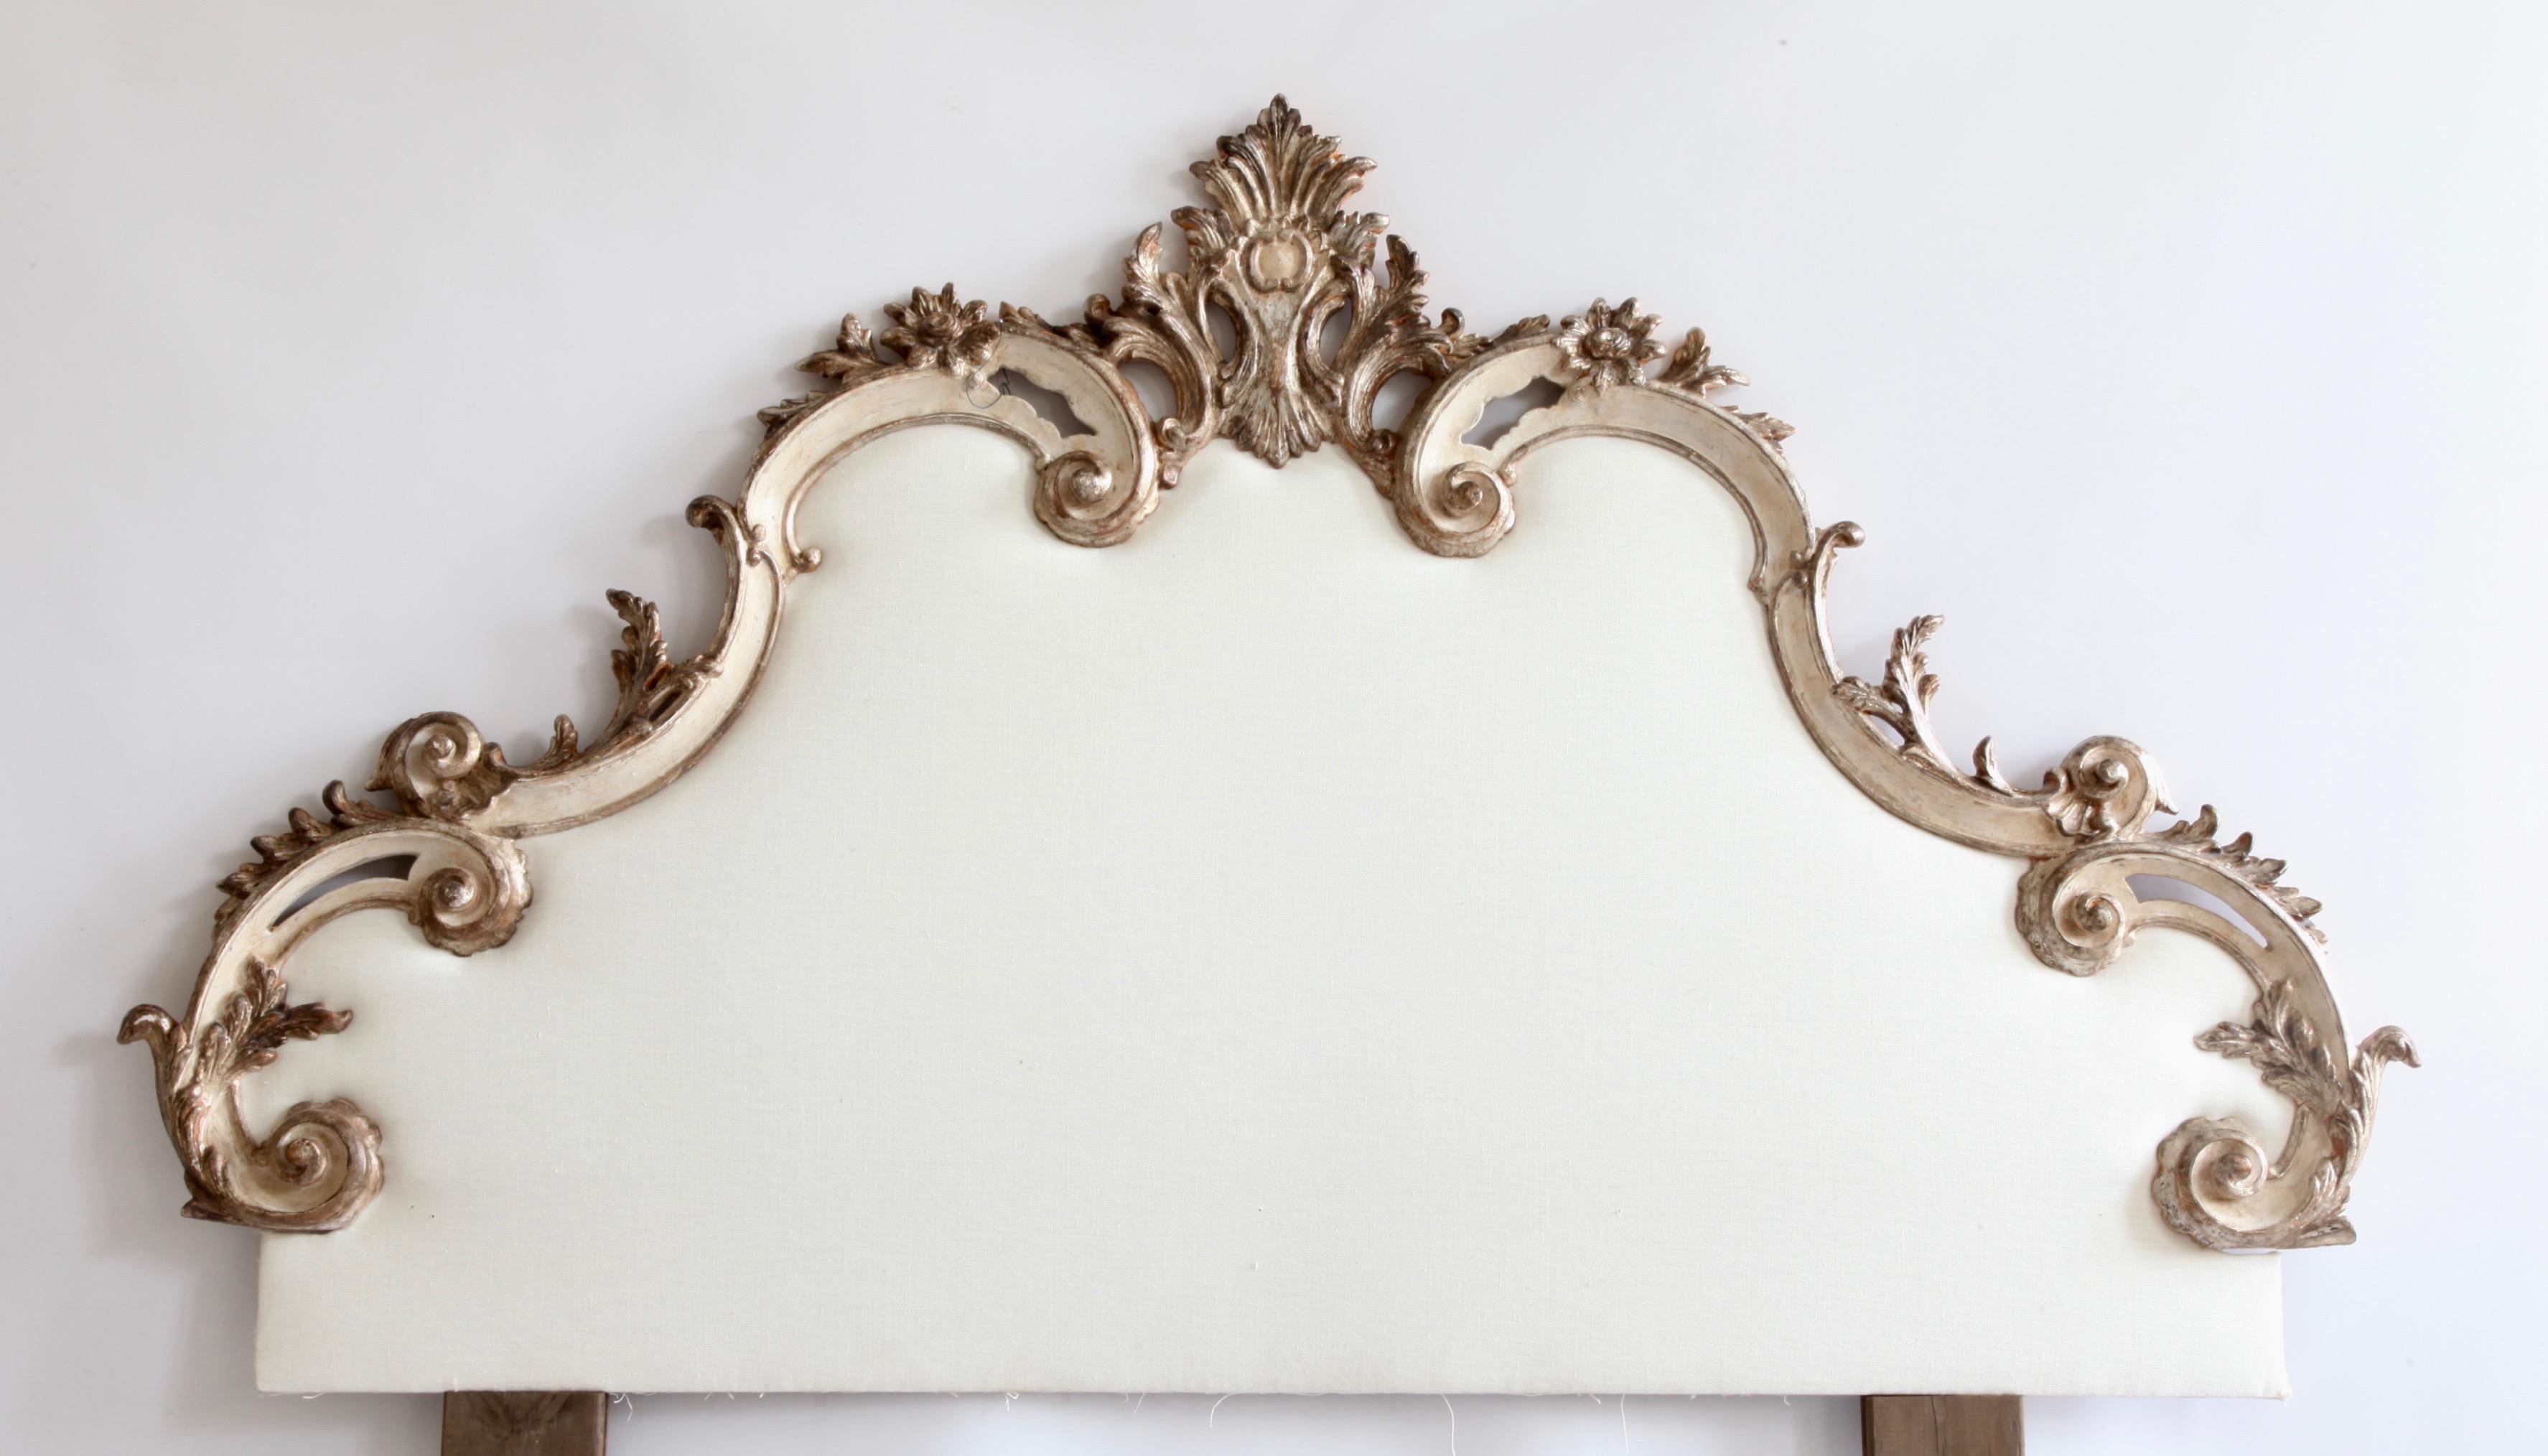 This early 20th century, hand carved headboard from Venice, Italy, is finished in an old, taupe, white patina, enhanced by hand gilded, silver highlights. The carving consists of sweeping, deep scrolled, 's' curves and decoratively carved accents of